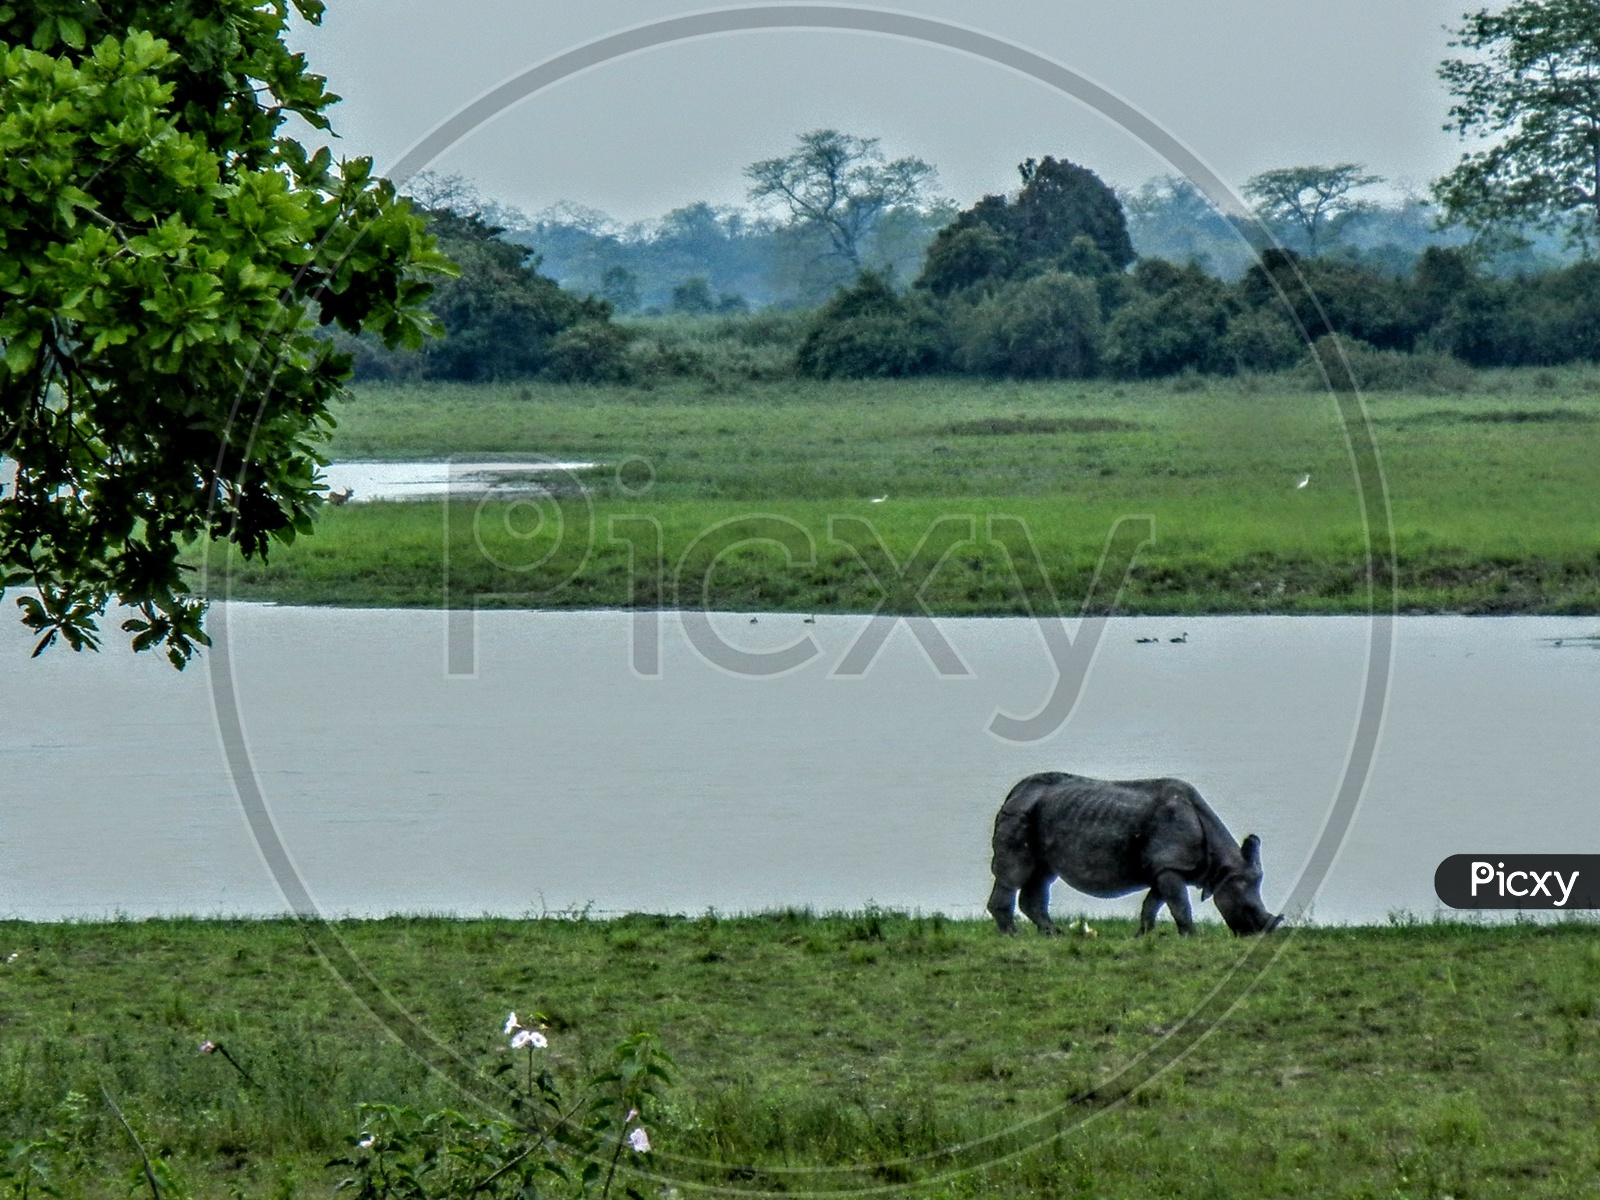 A greater one- horned rhinoceros grazing by a lake.